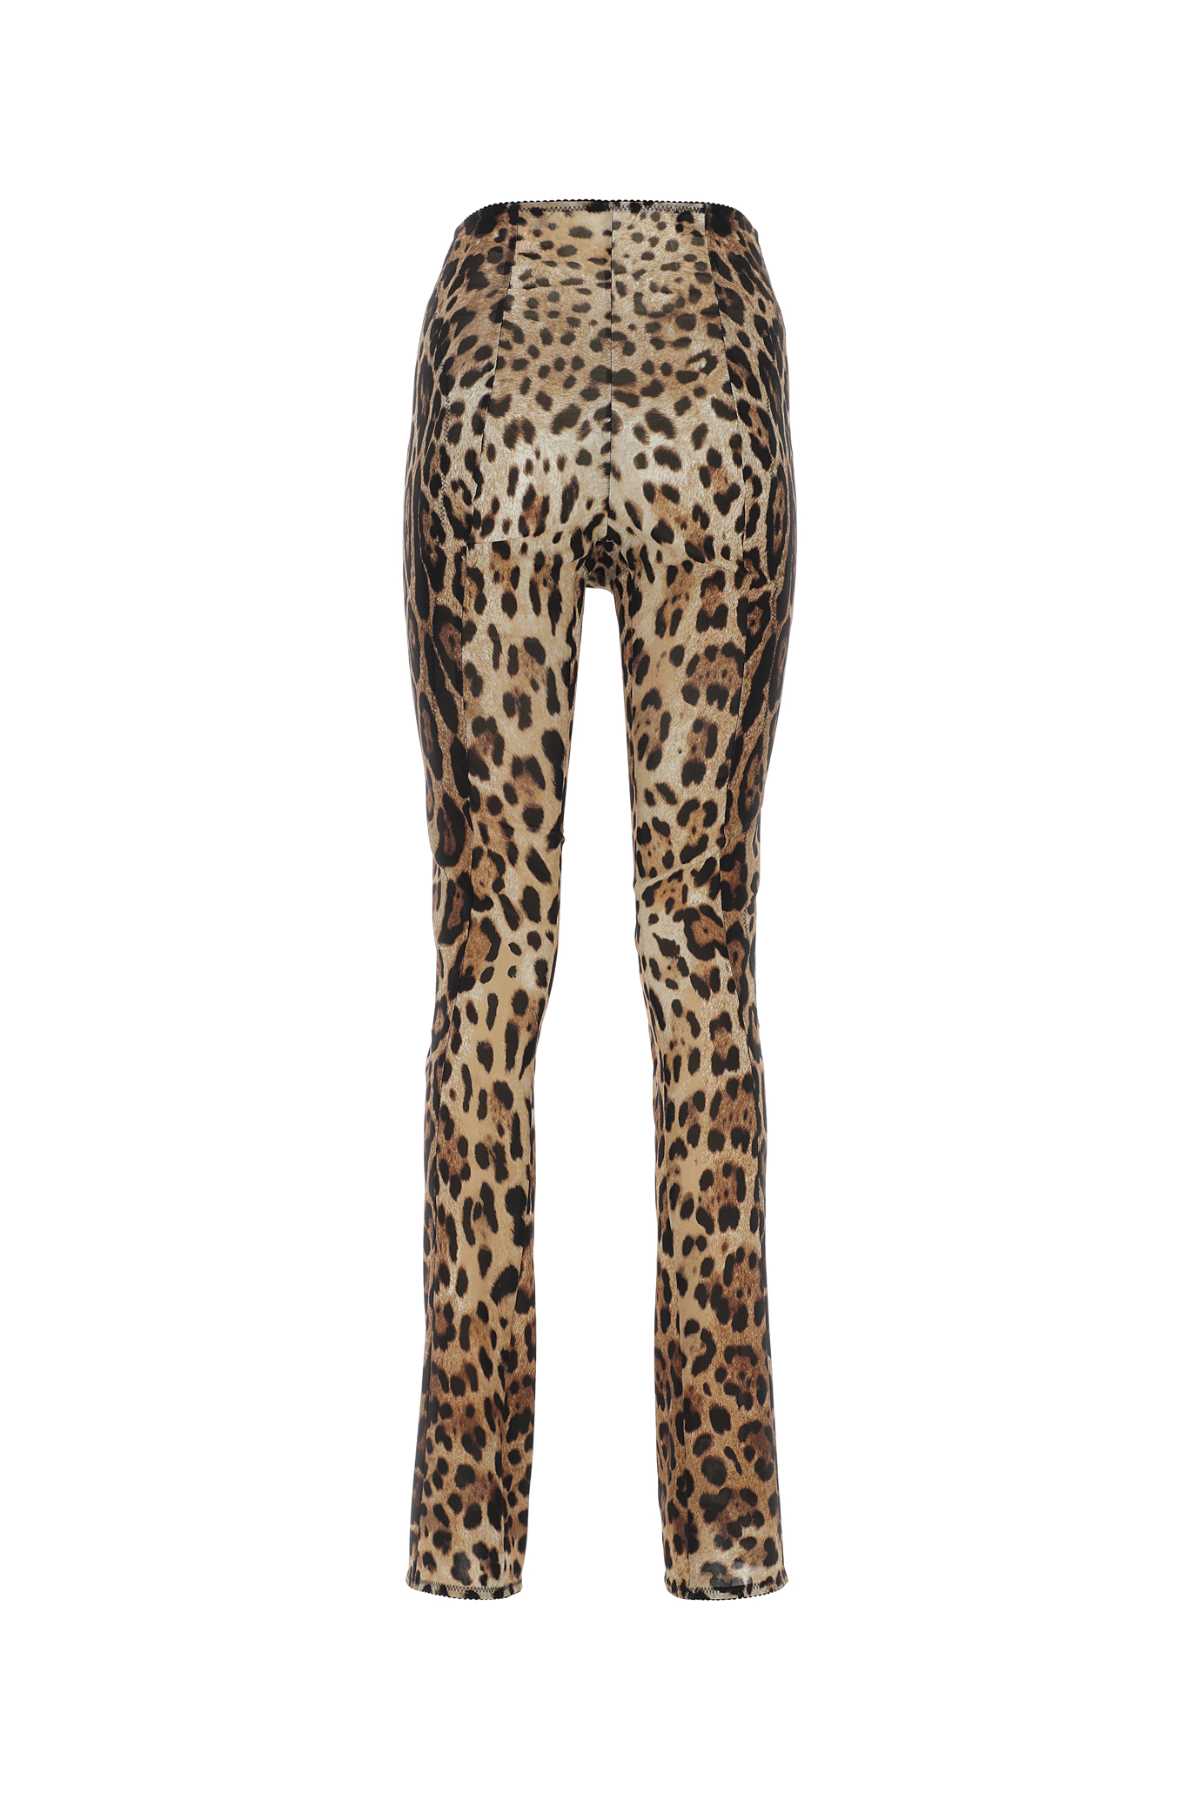 DOLCE & GABBANA PRINTED MARQUISETTE PANT